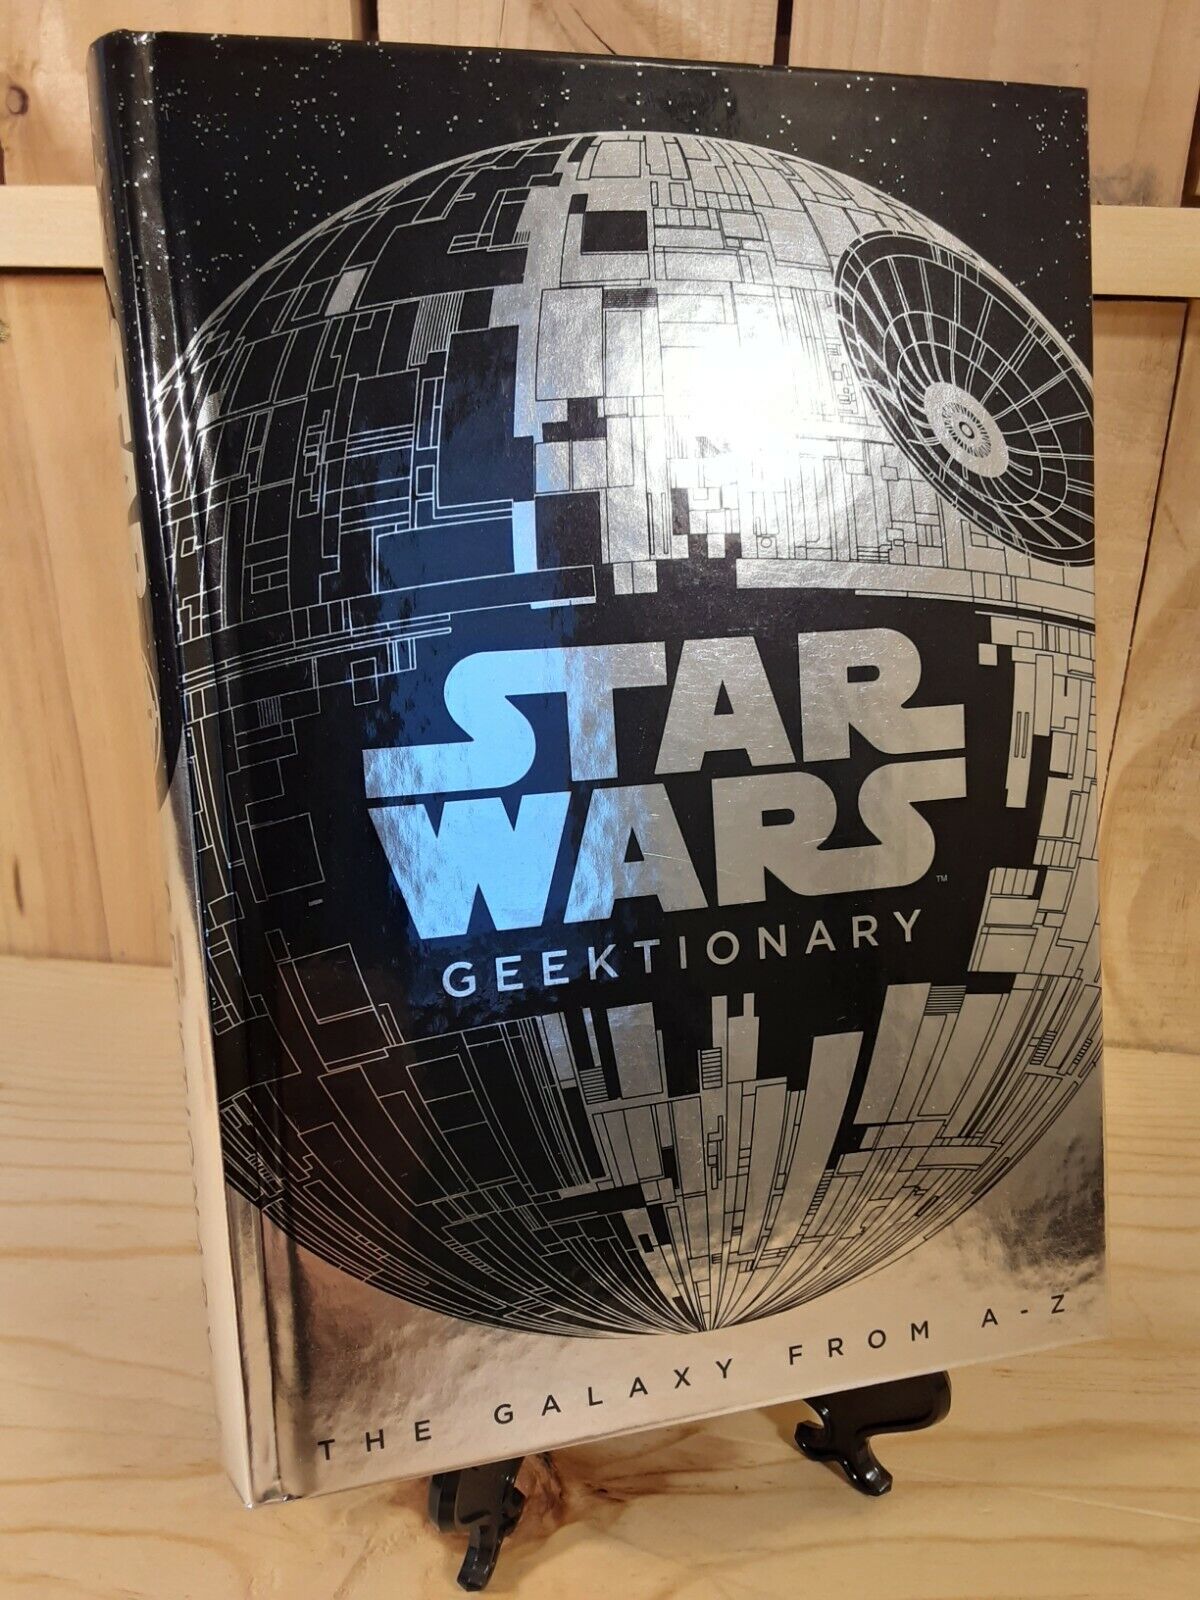 The Star Wars Geektionary HC The Galaxy from A-Z - Egmont NEW Disney Lucas Film